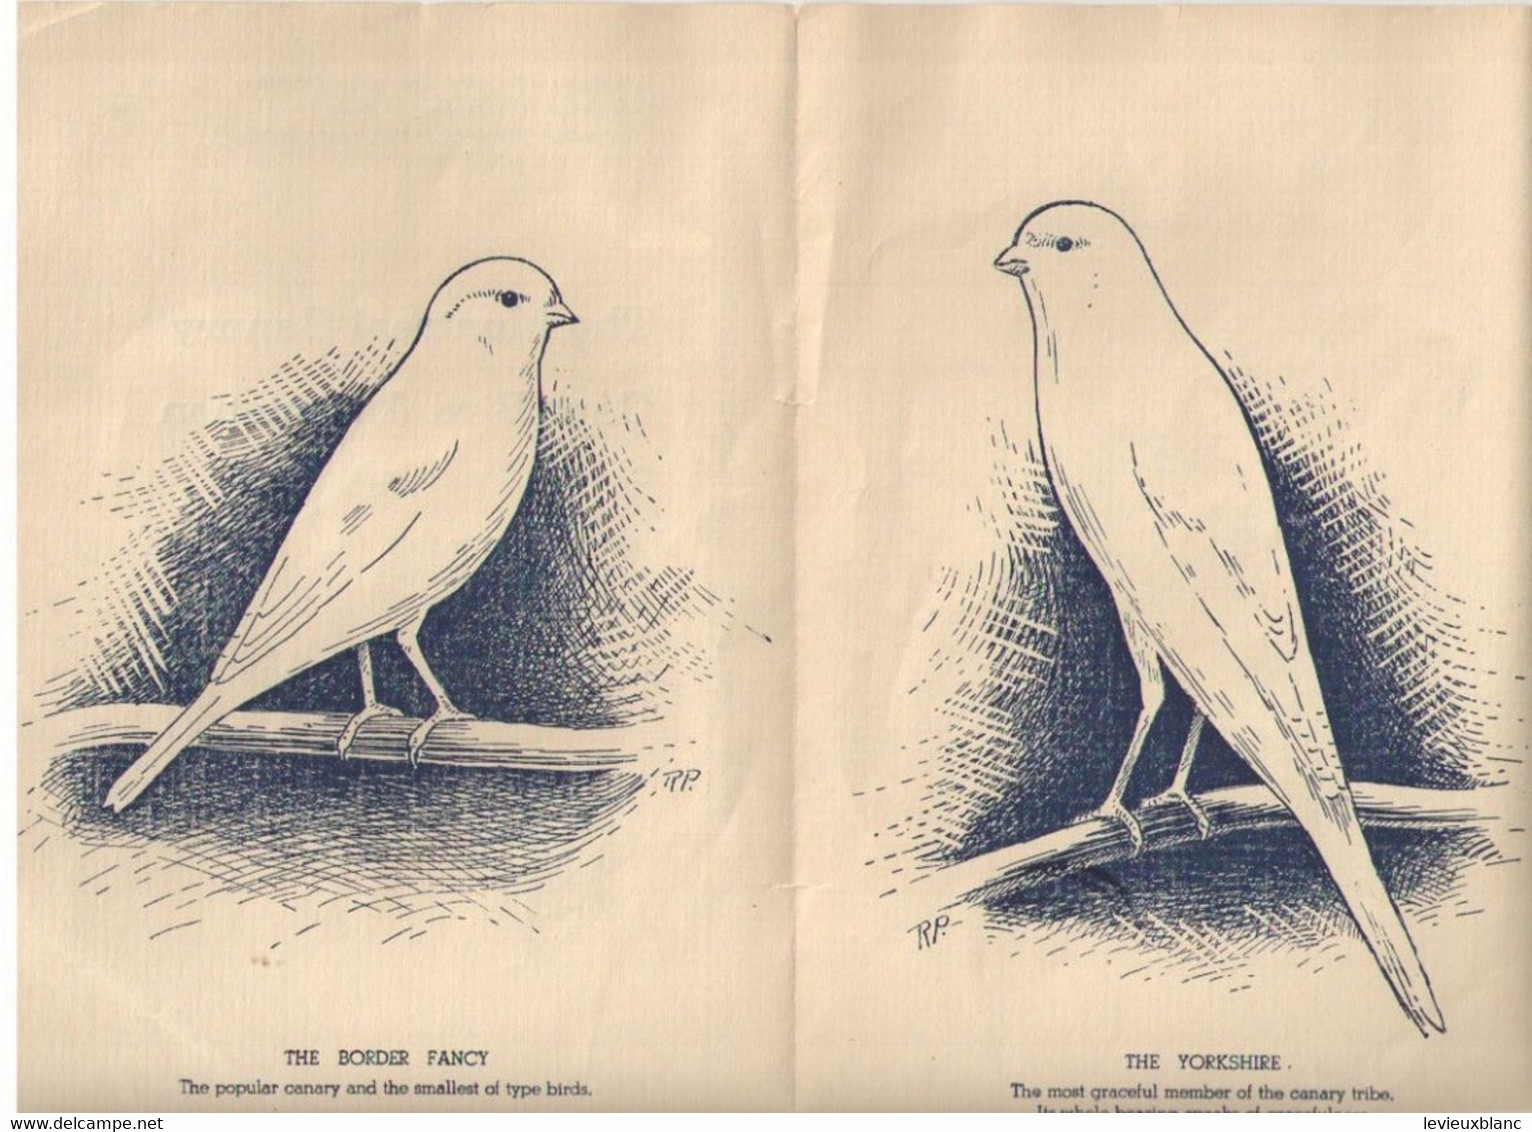 The Montreal CANARY And CAGE BIRDS Association/Canada's Championship Show/Legion Hall VERDUNl/1942   VPN378 - Pet/ Animal Care